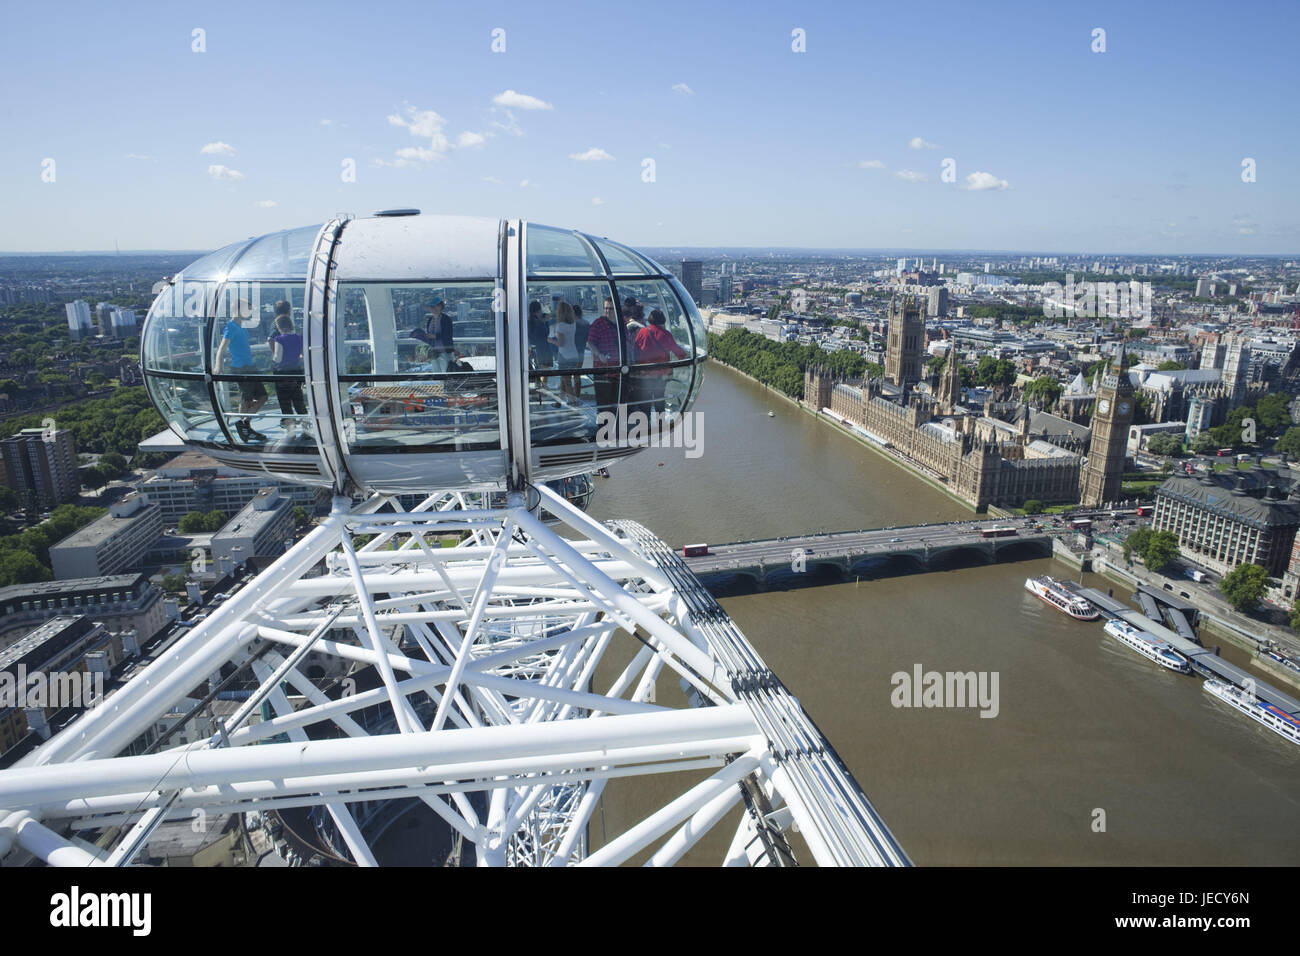 England, London, Westminster, the Thames, view of London Eye, passenger's cabin, town, town view, architecture, modern, aerial shots, tourist, tourism, sunshine, view, river, Stock Photo